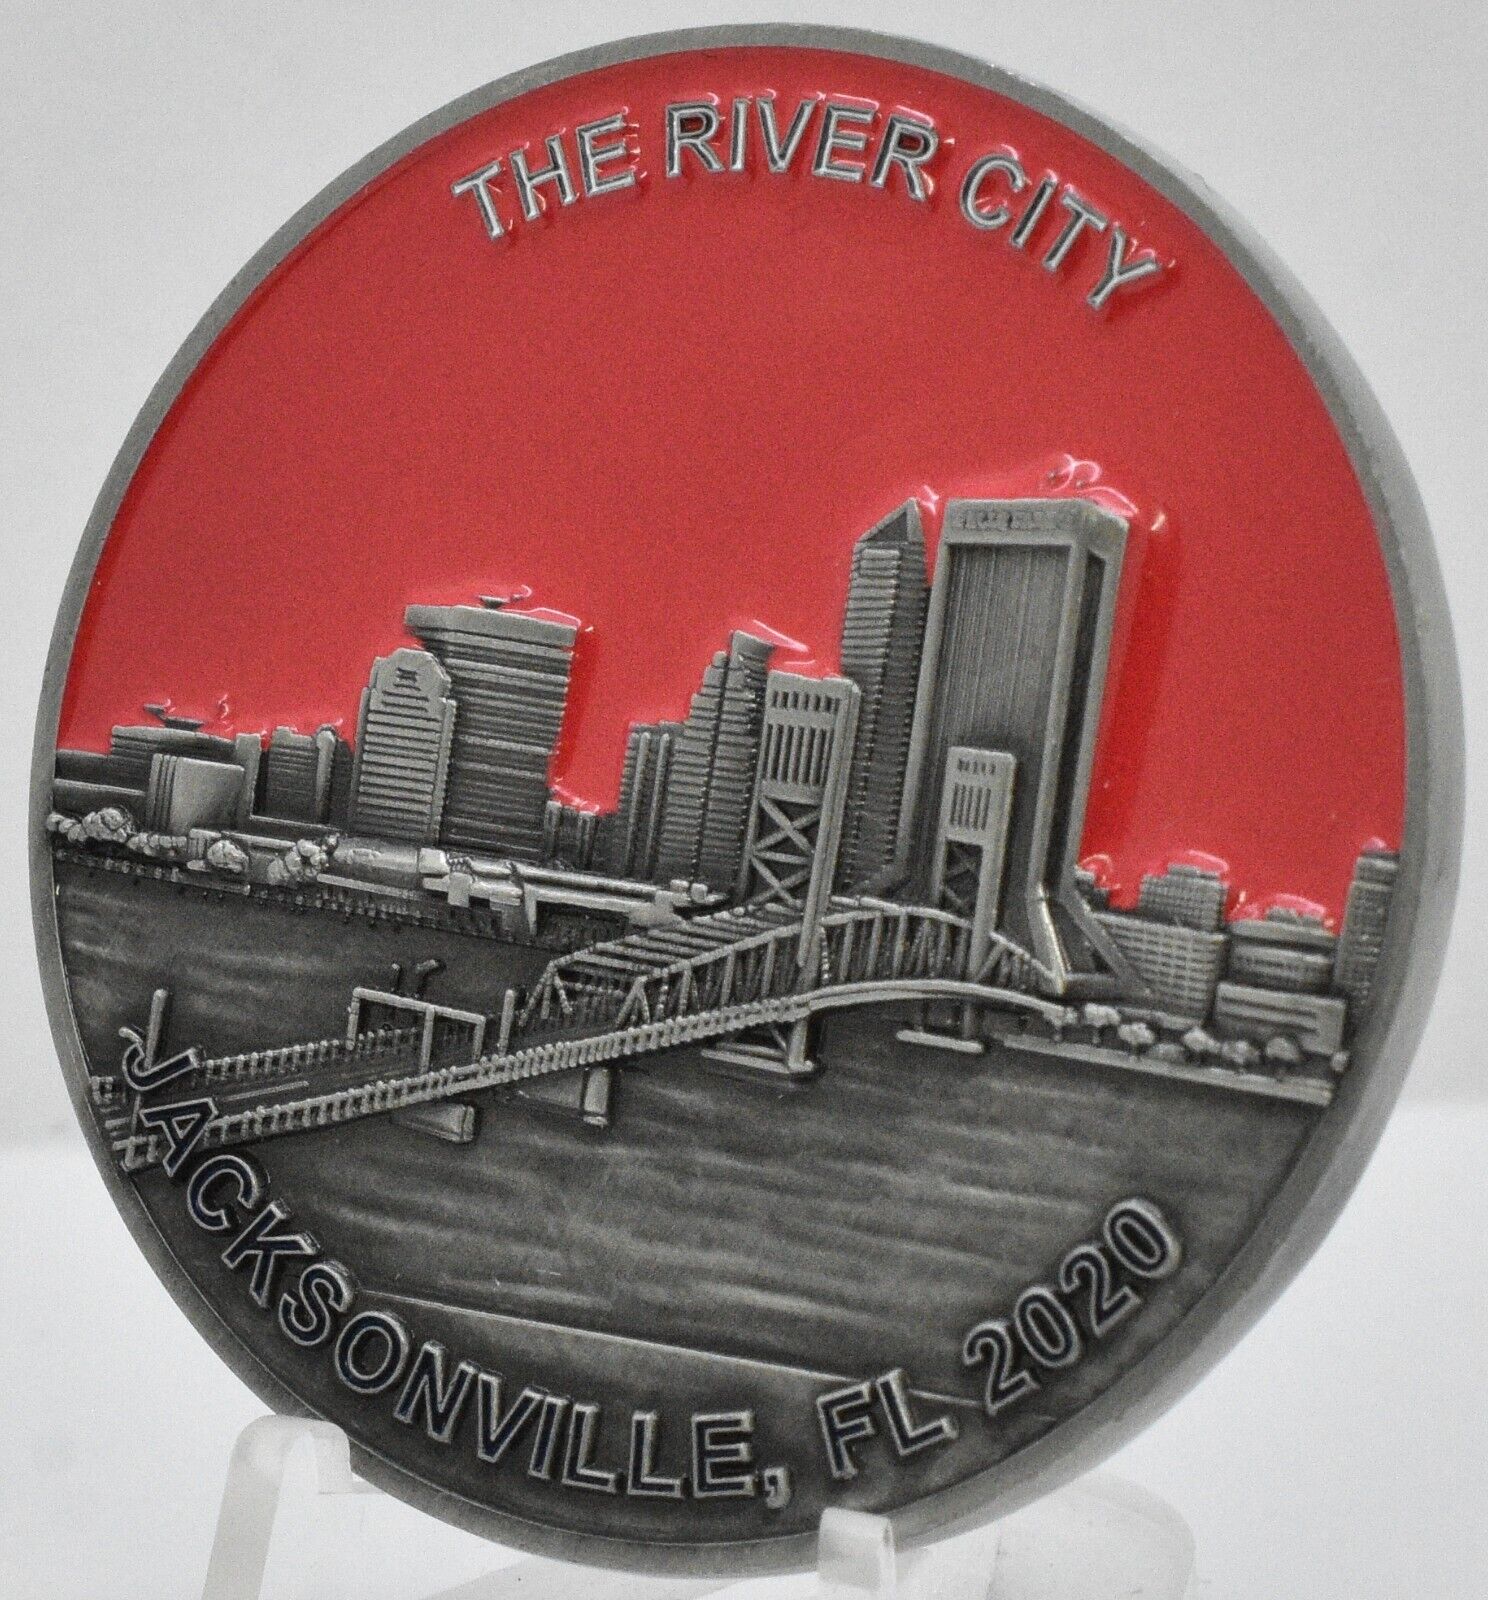 2016 RNC Republican National Convention Donald Trump Jacksonville Challenge Coin